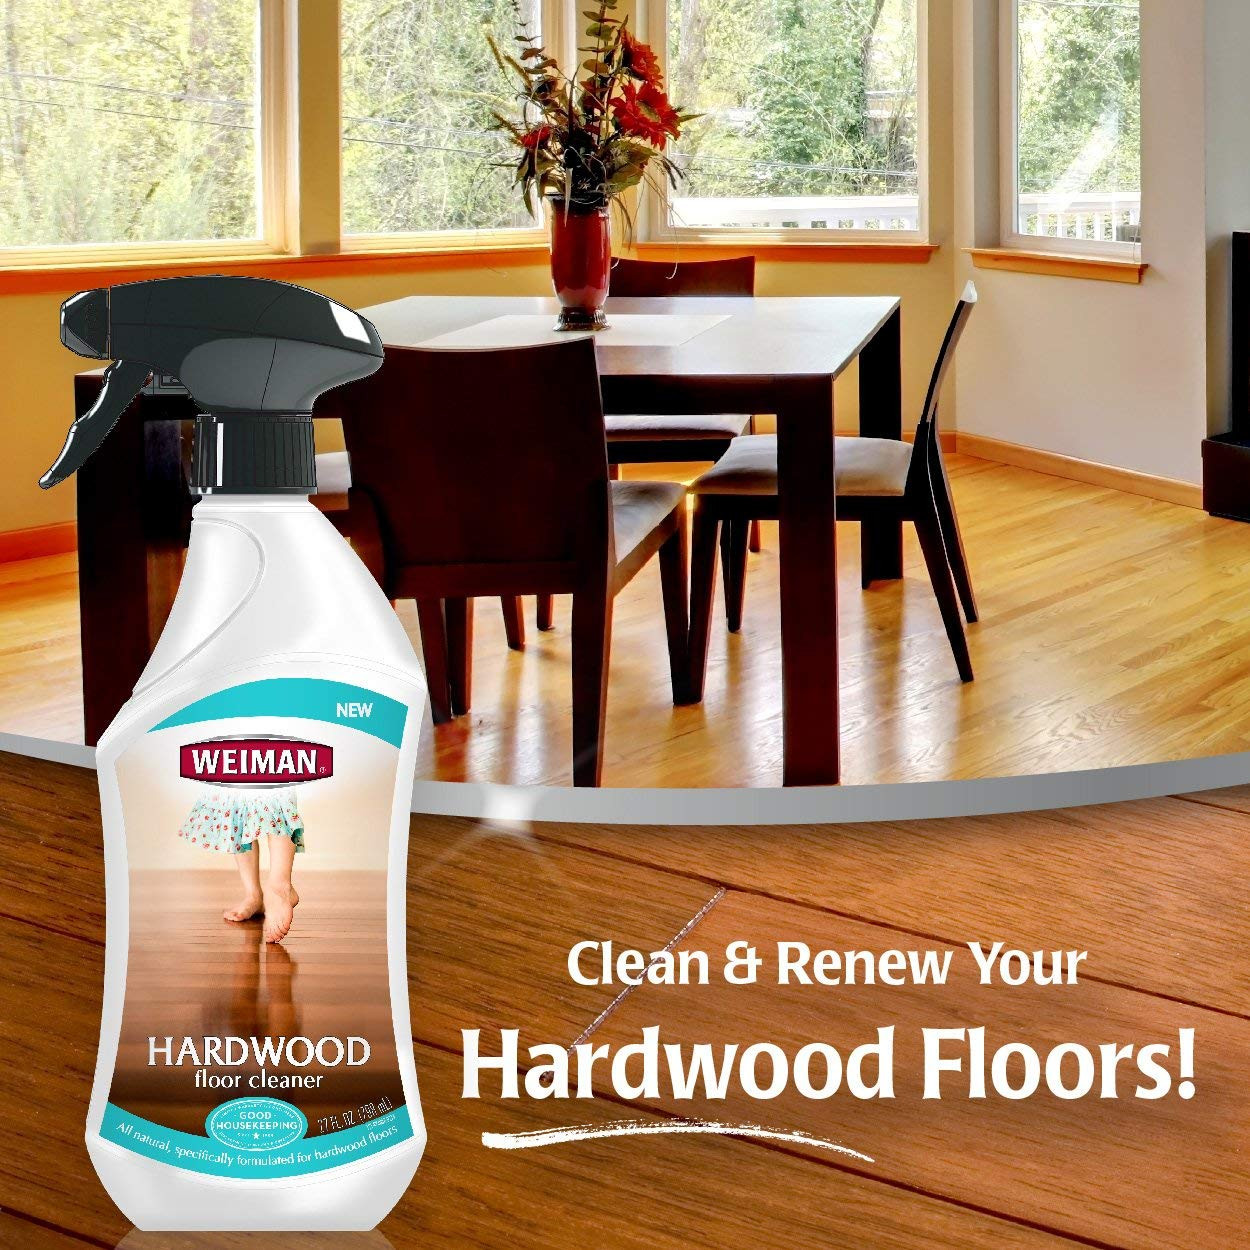 20 Recommended How to Clean Engineered Hardwood Floors after Installation 2024 free download how to clean engineered hardwood floors after installation of amazon com weiman hardwood floor cleaner surface safe no harsh throughout amazon com weiman hardwood floor cleaner surface safe 